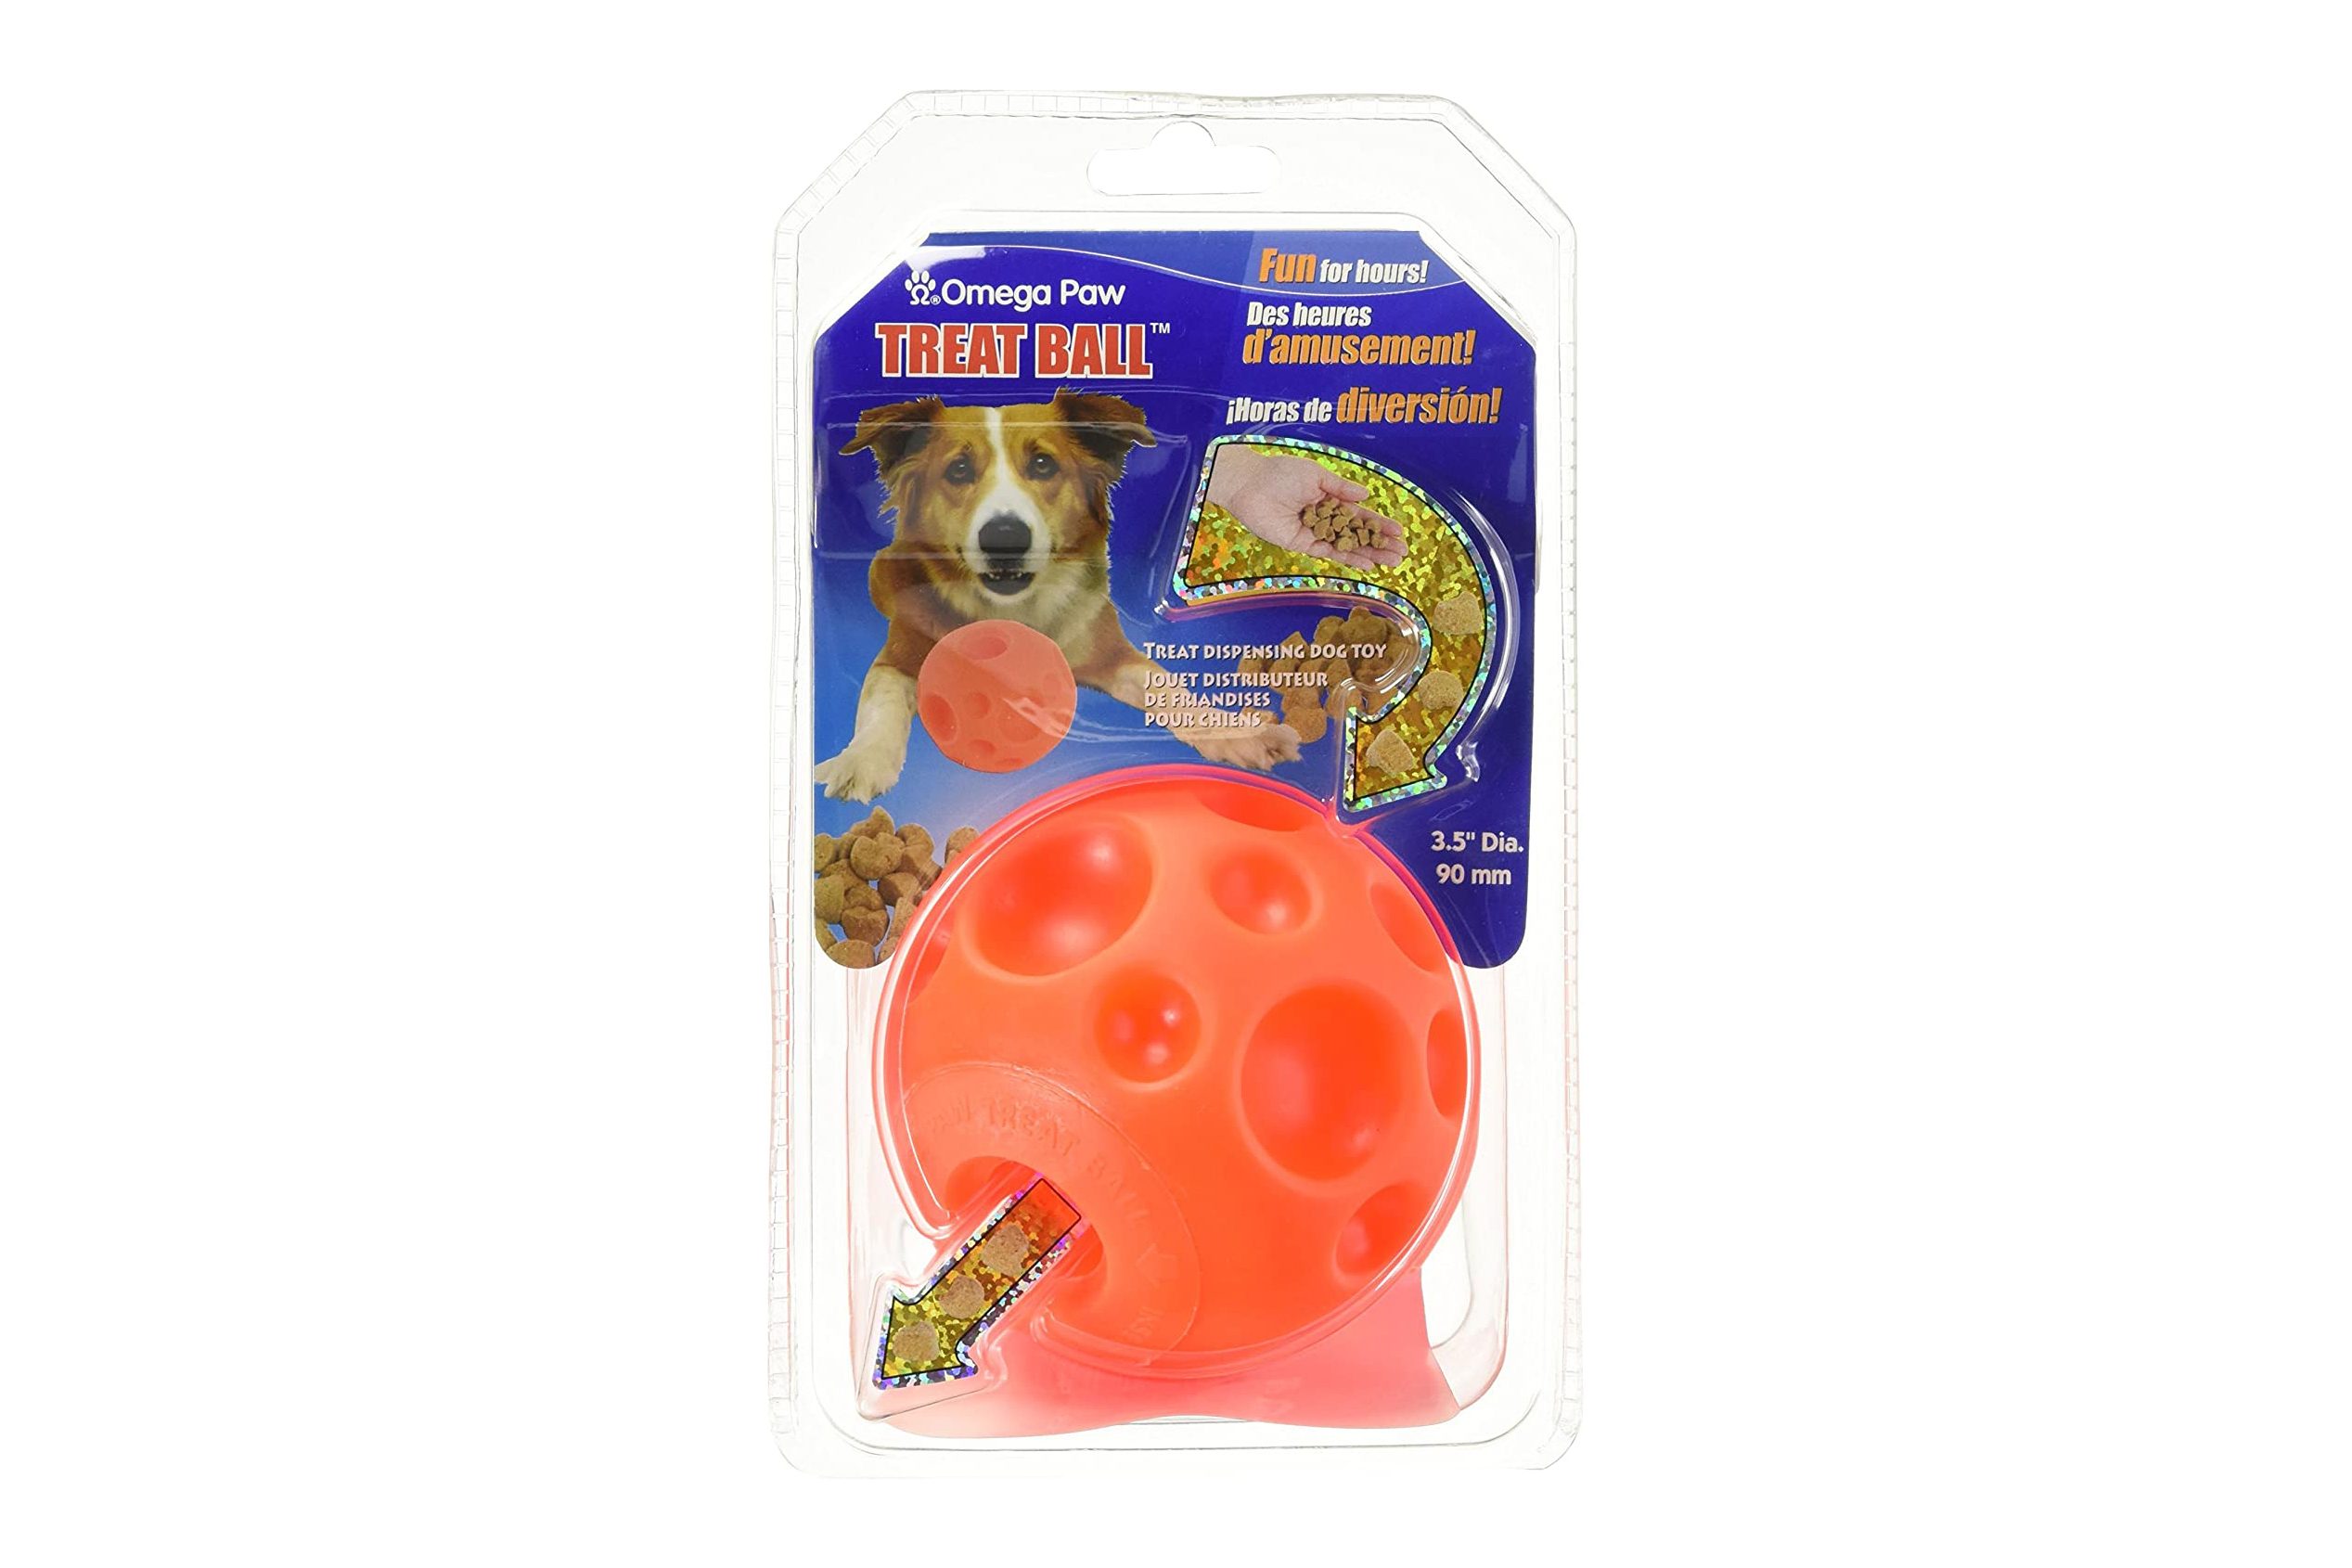 The 15 Best Dog Puzzle Toys